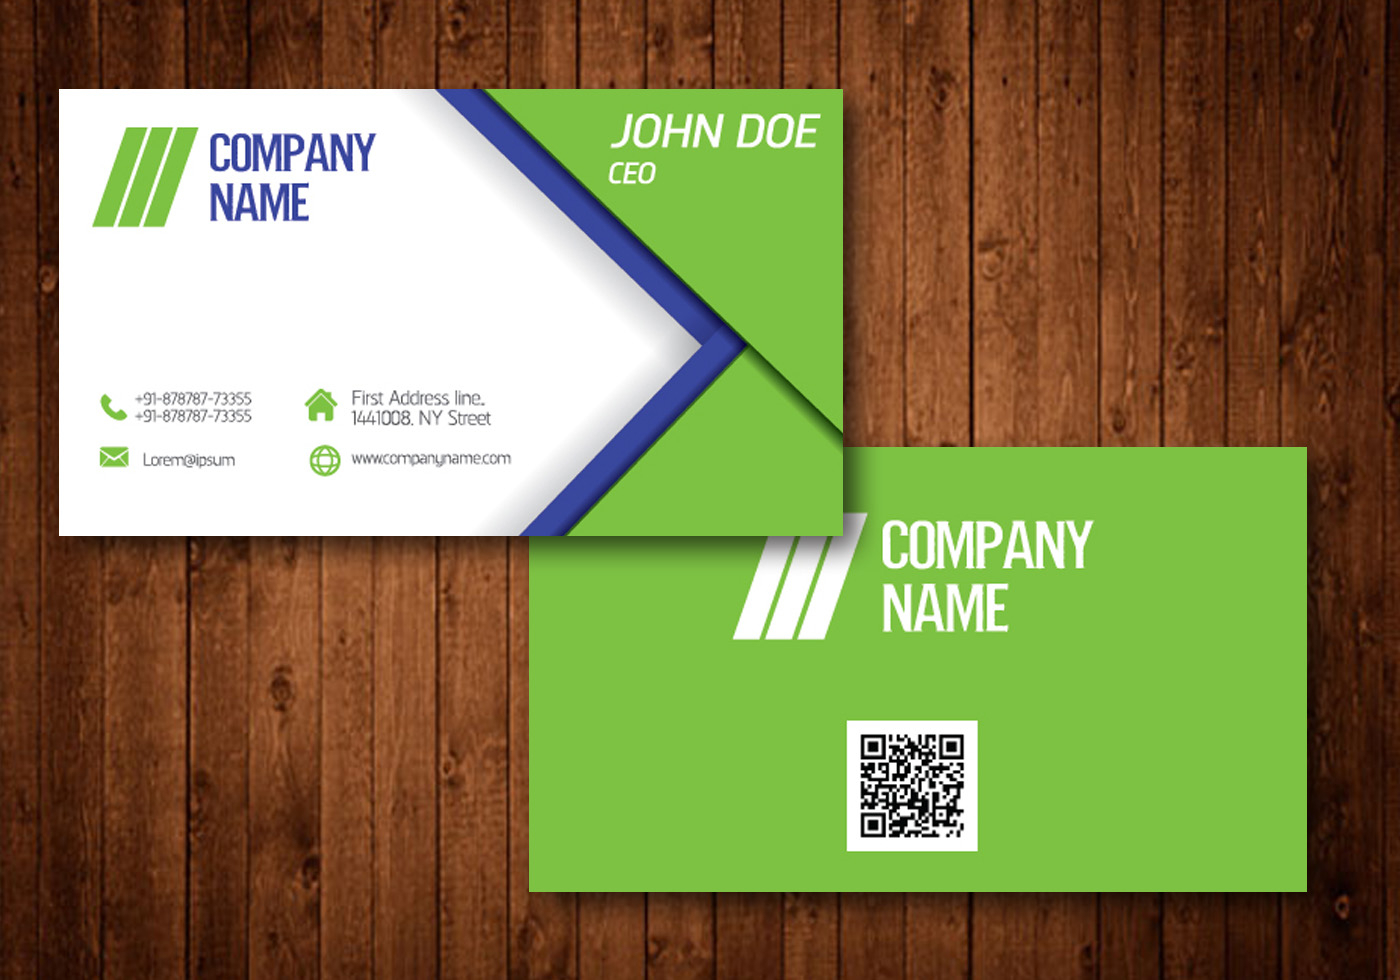 Business Card Free Vector Art – (109,812 Free Downloads) For Templates For Visiting Cards Free Downloads